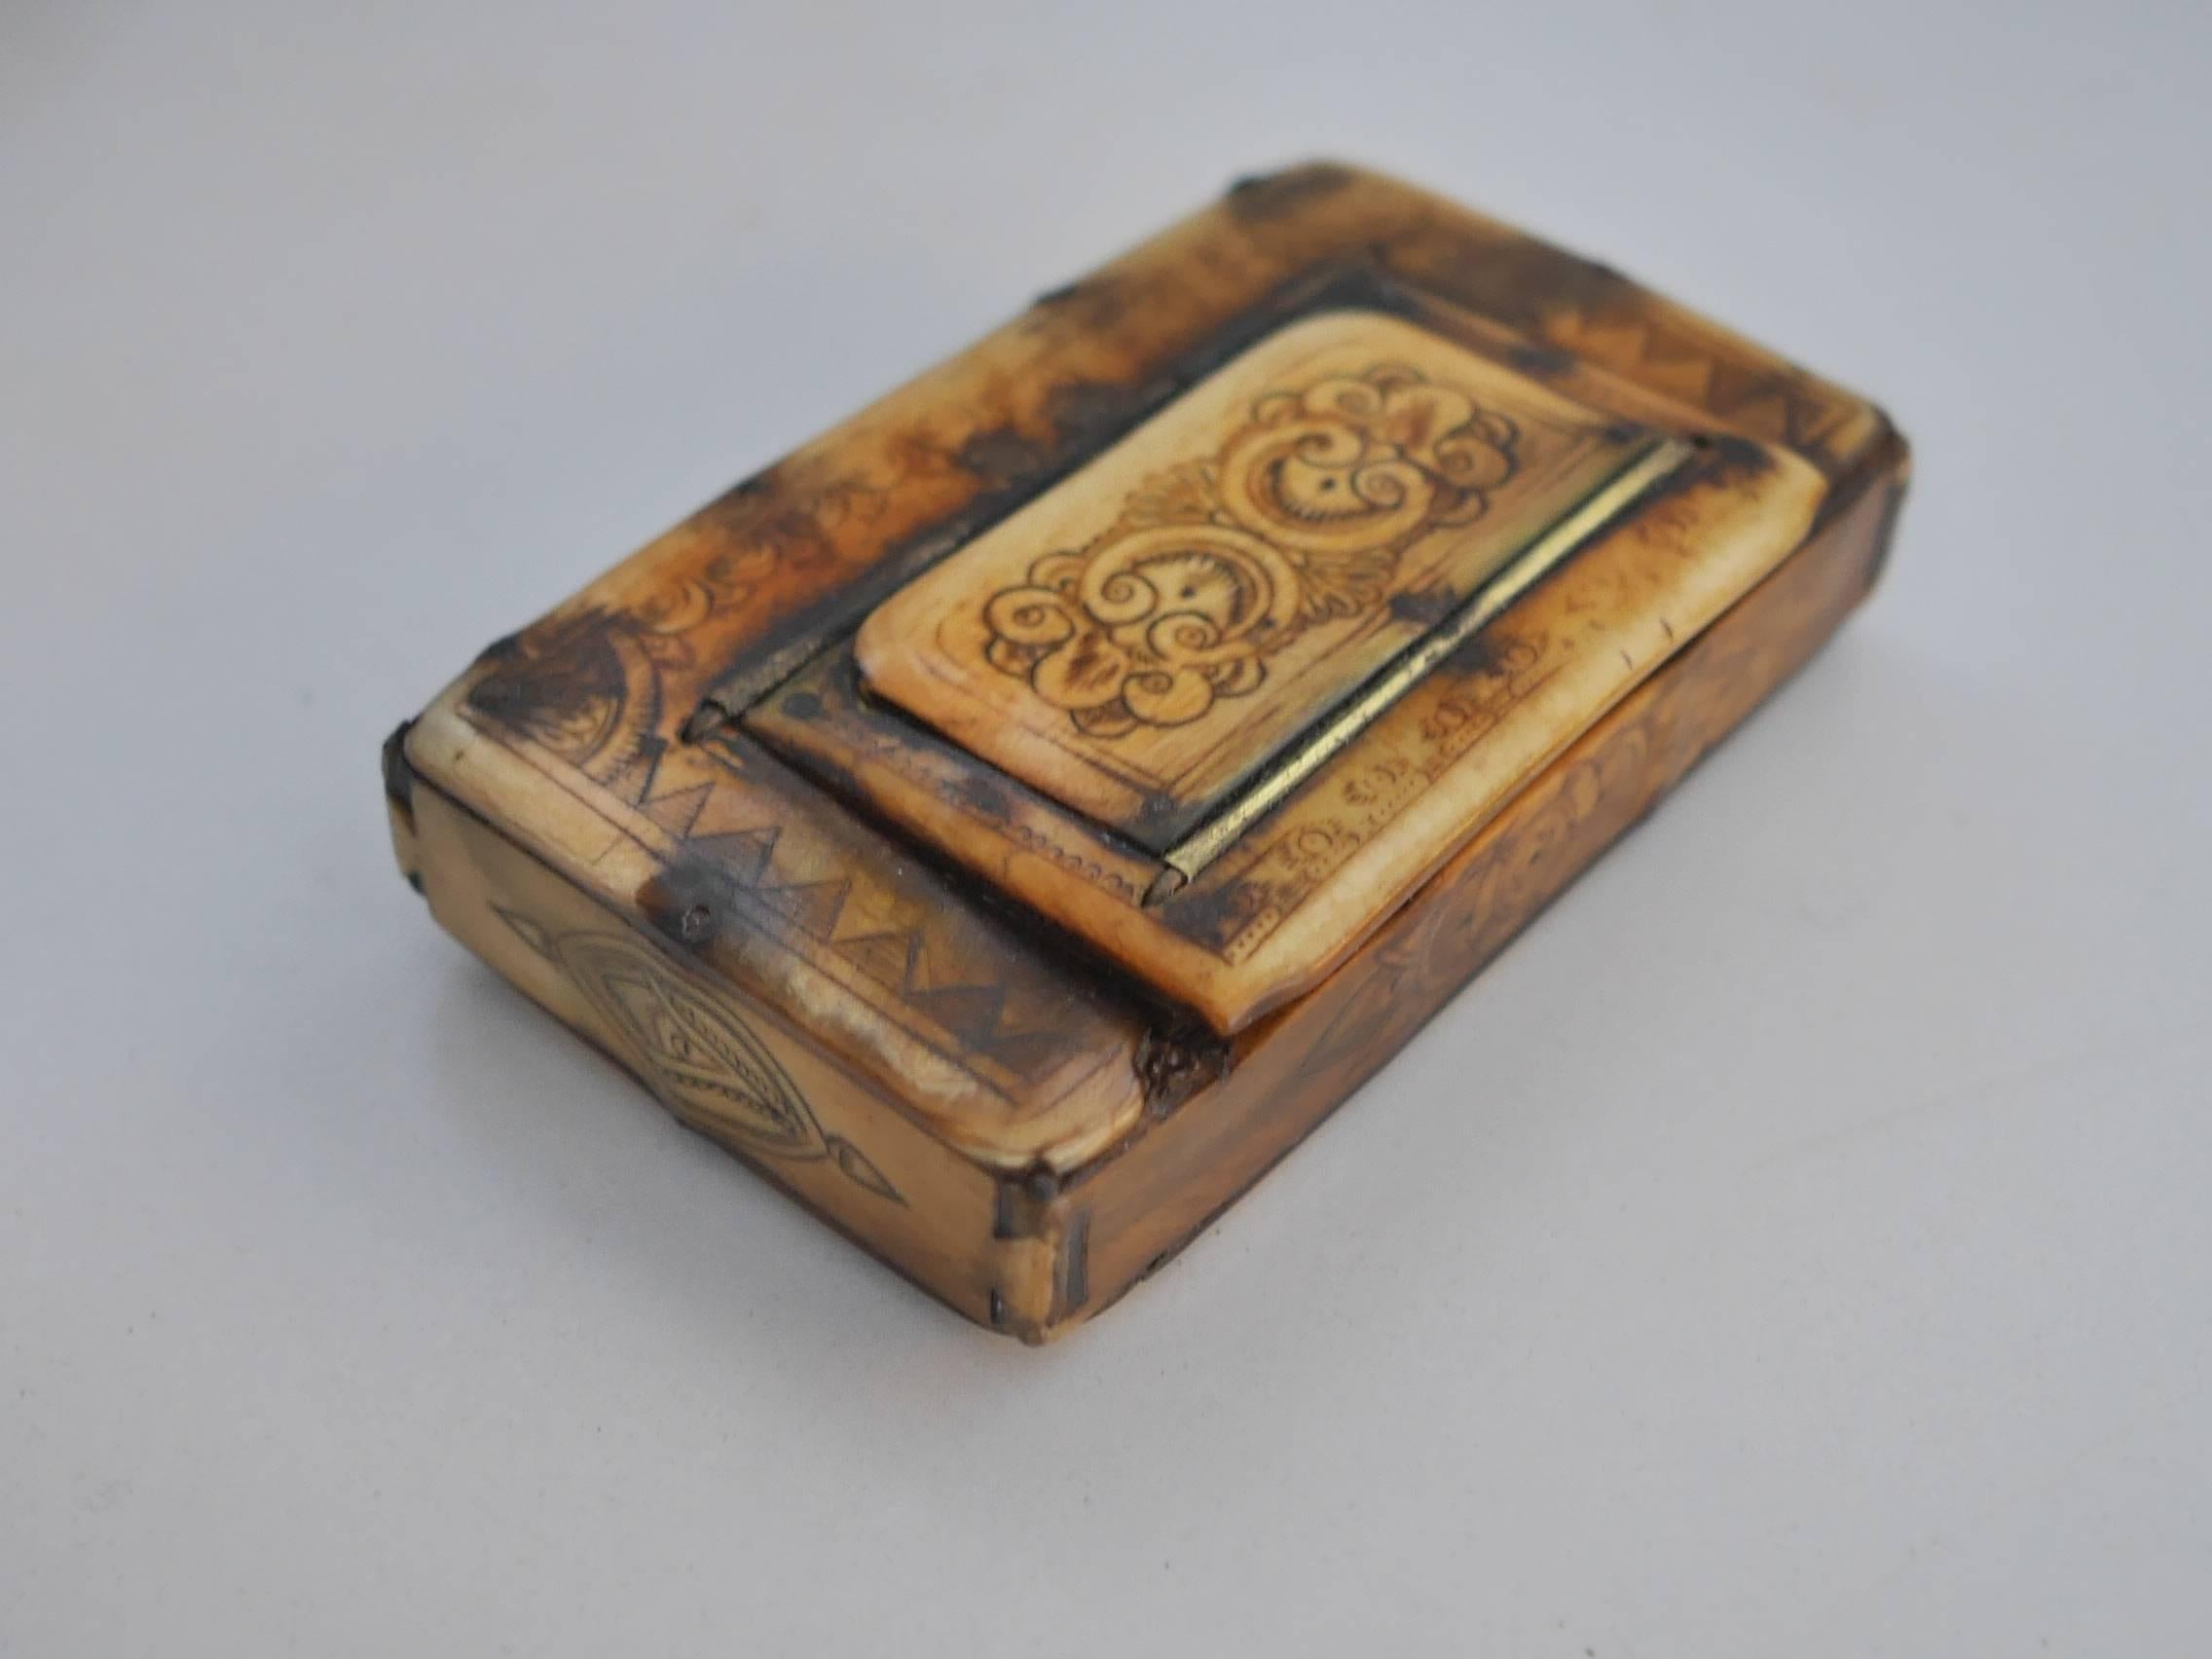 Beautifully engraved Horn snuffbox with a double opening: a big main lid that opens the box entirely for the owner's consumption and a smaller one with two holes of a finger's size that was meant to control the portion delivered to someone asking